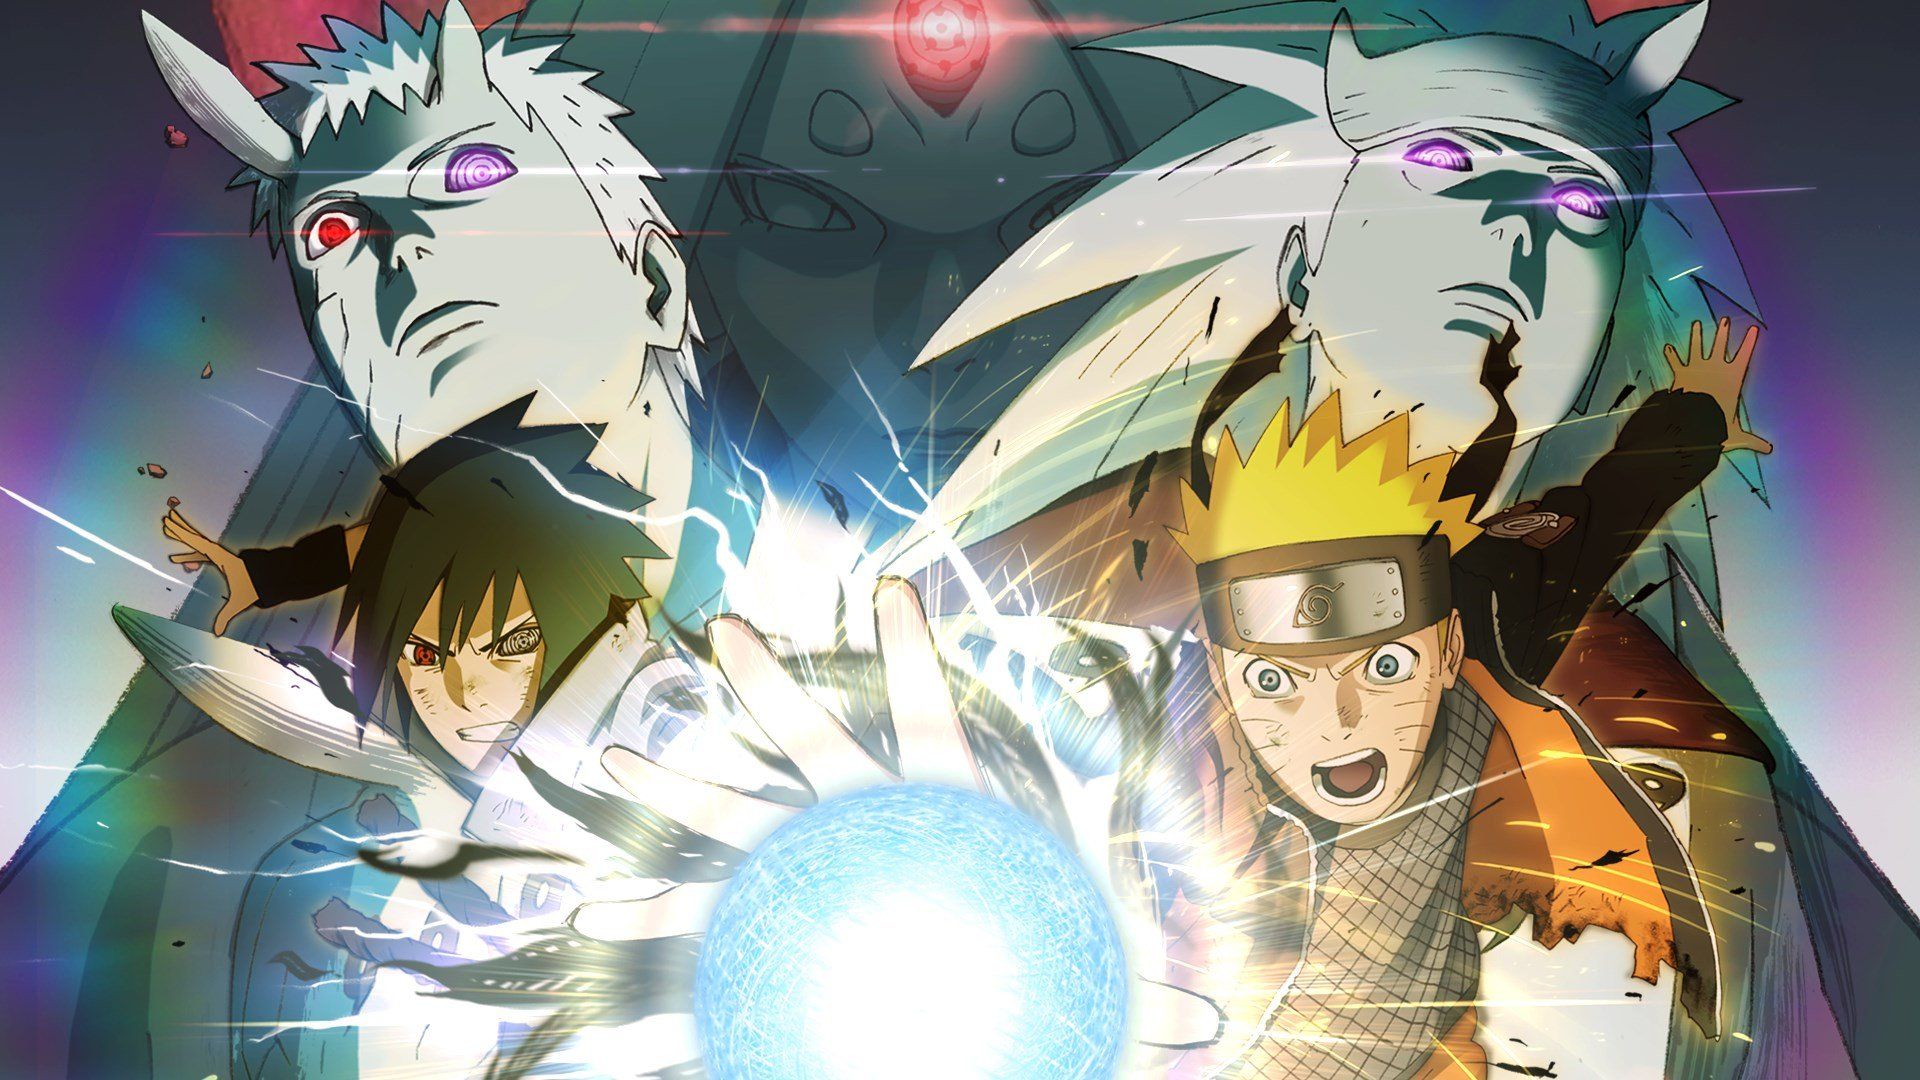 Naruto Ultimate Ninja Storm 5 Isn't Happening Says Dev, But Can't Comment on a New Boruto Game